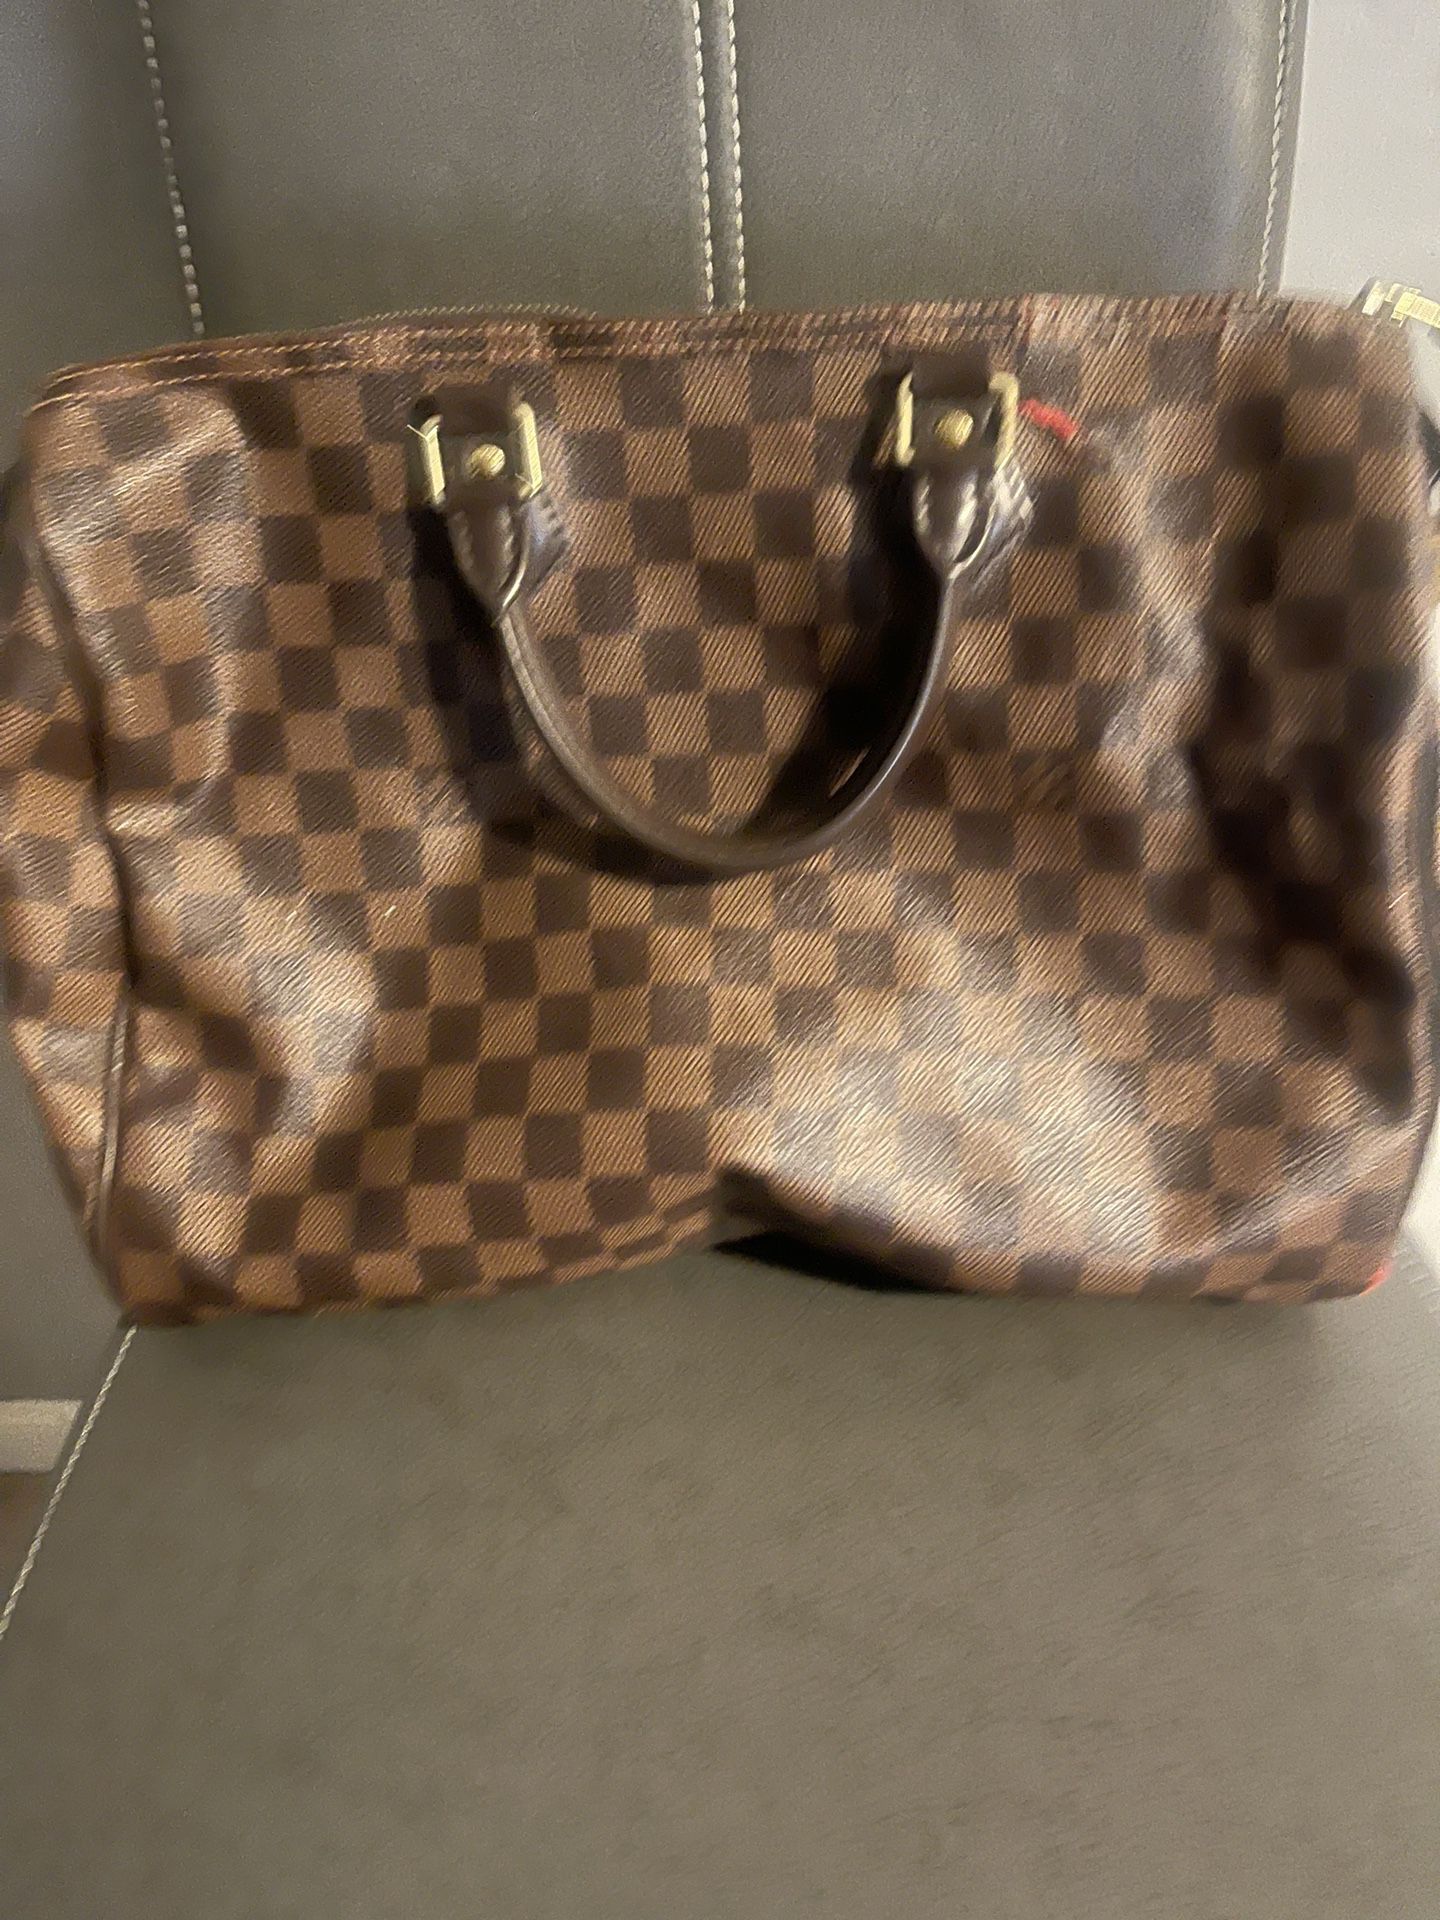 Louis Vuitton for Sale in Cleveland, OH - OfferUp